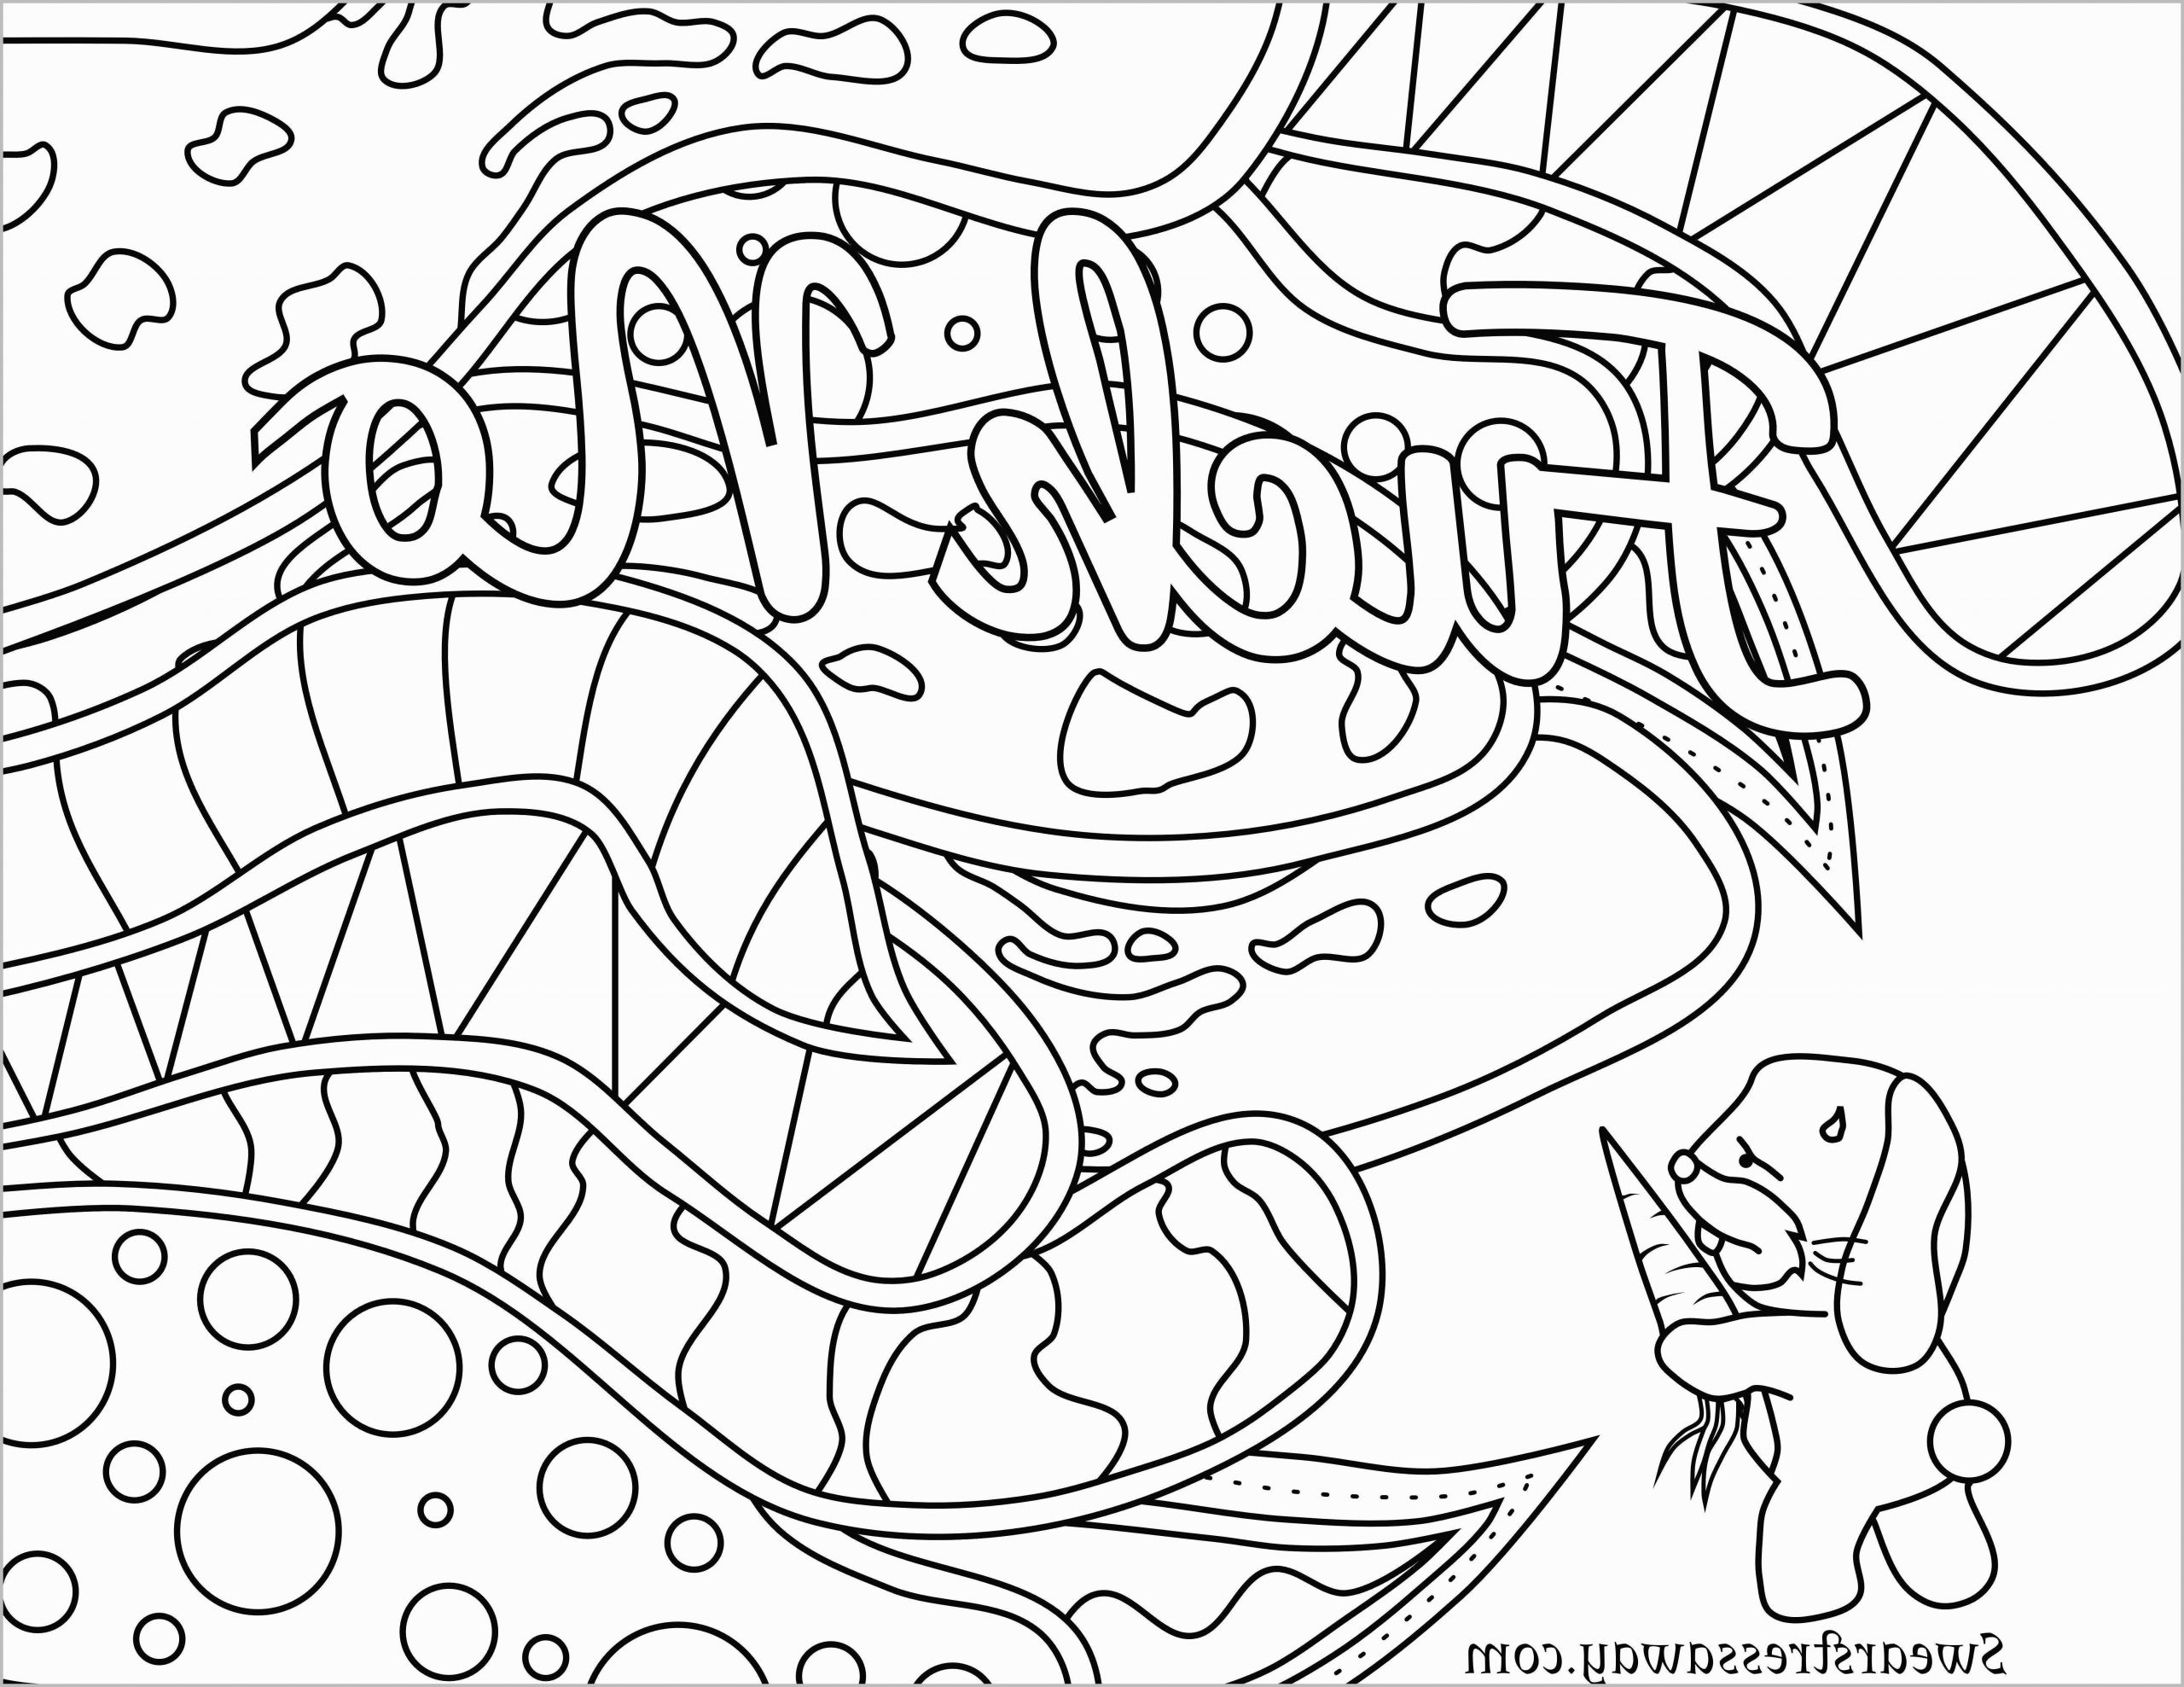 Coloring Pages : Swear Word Coloring Pages For Adults Best Of 25